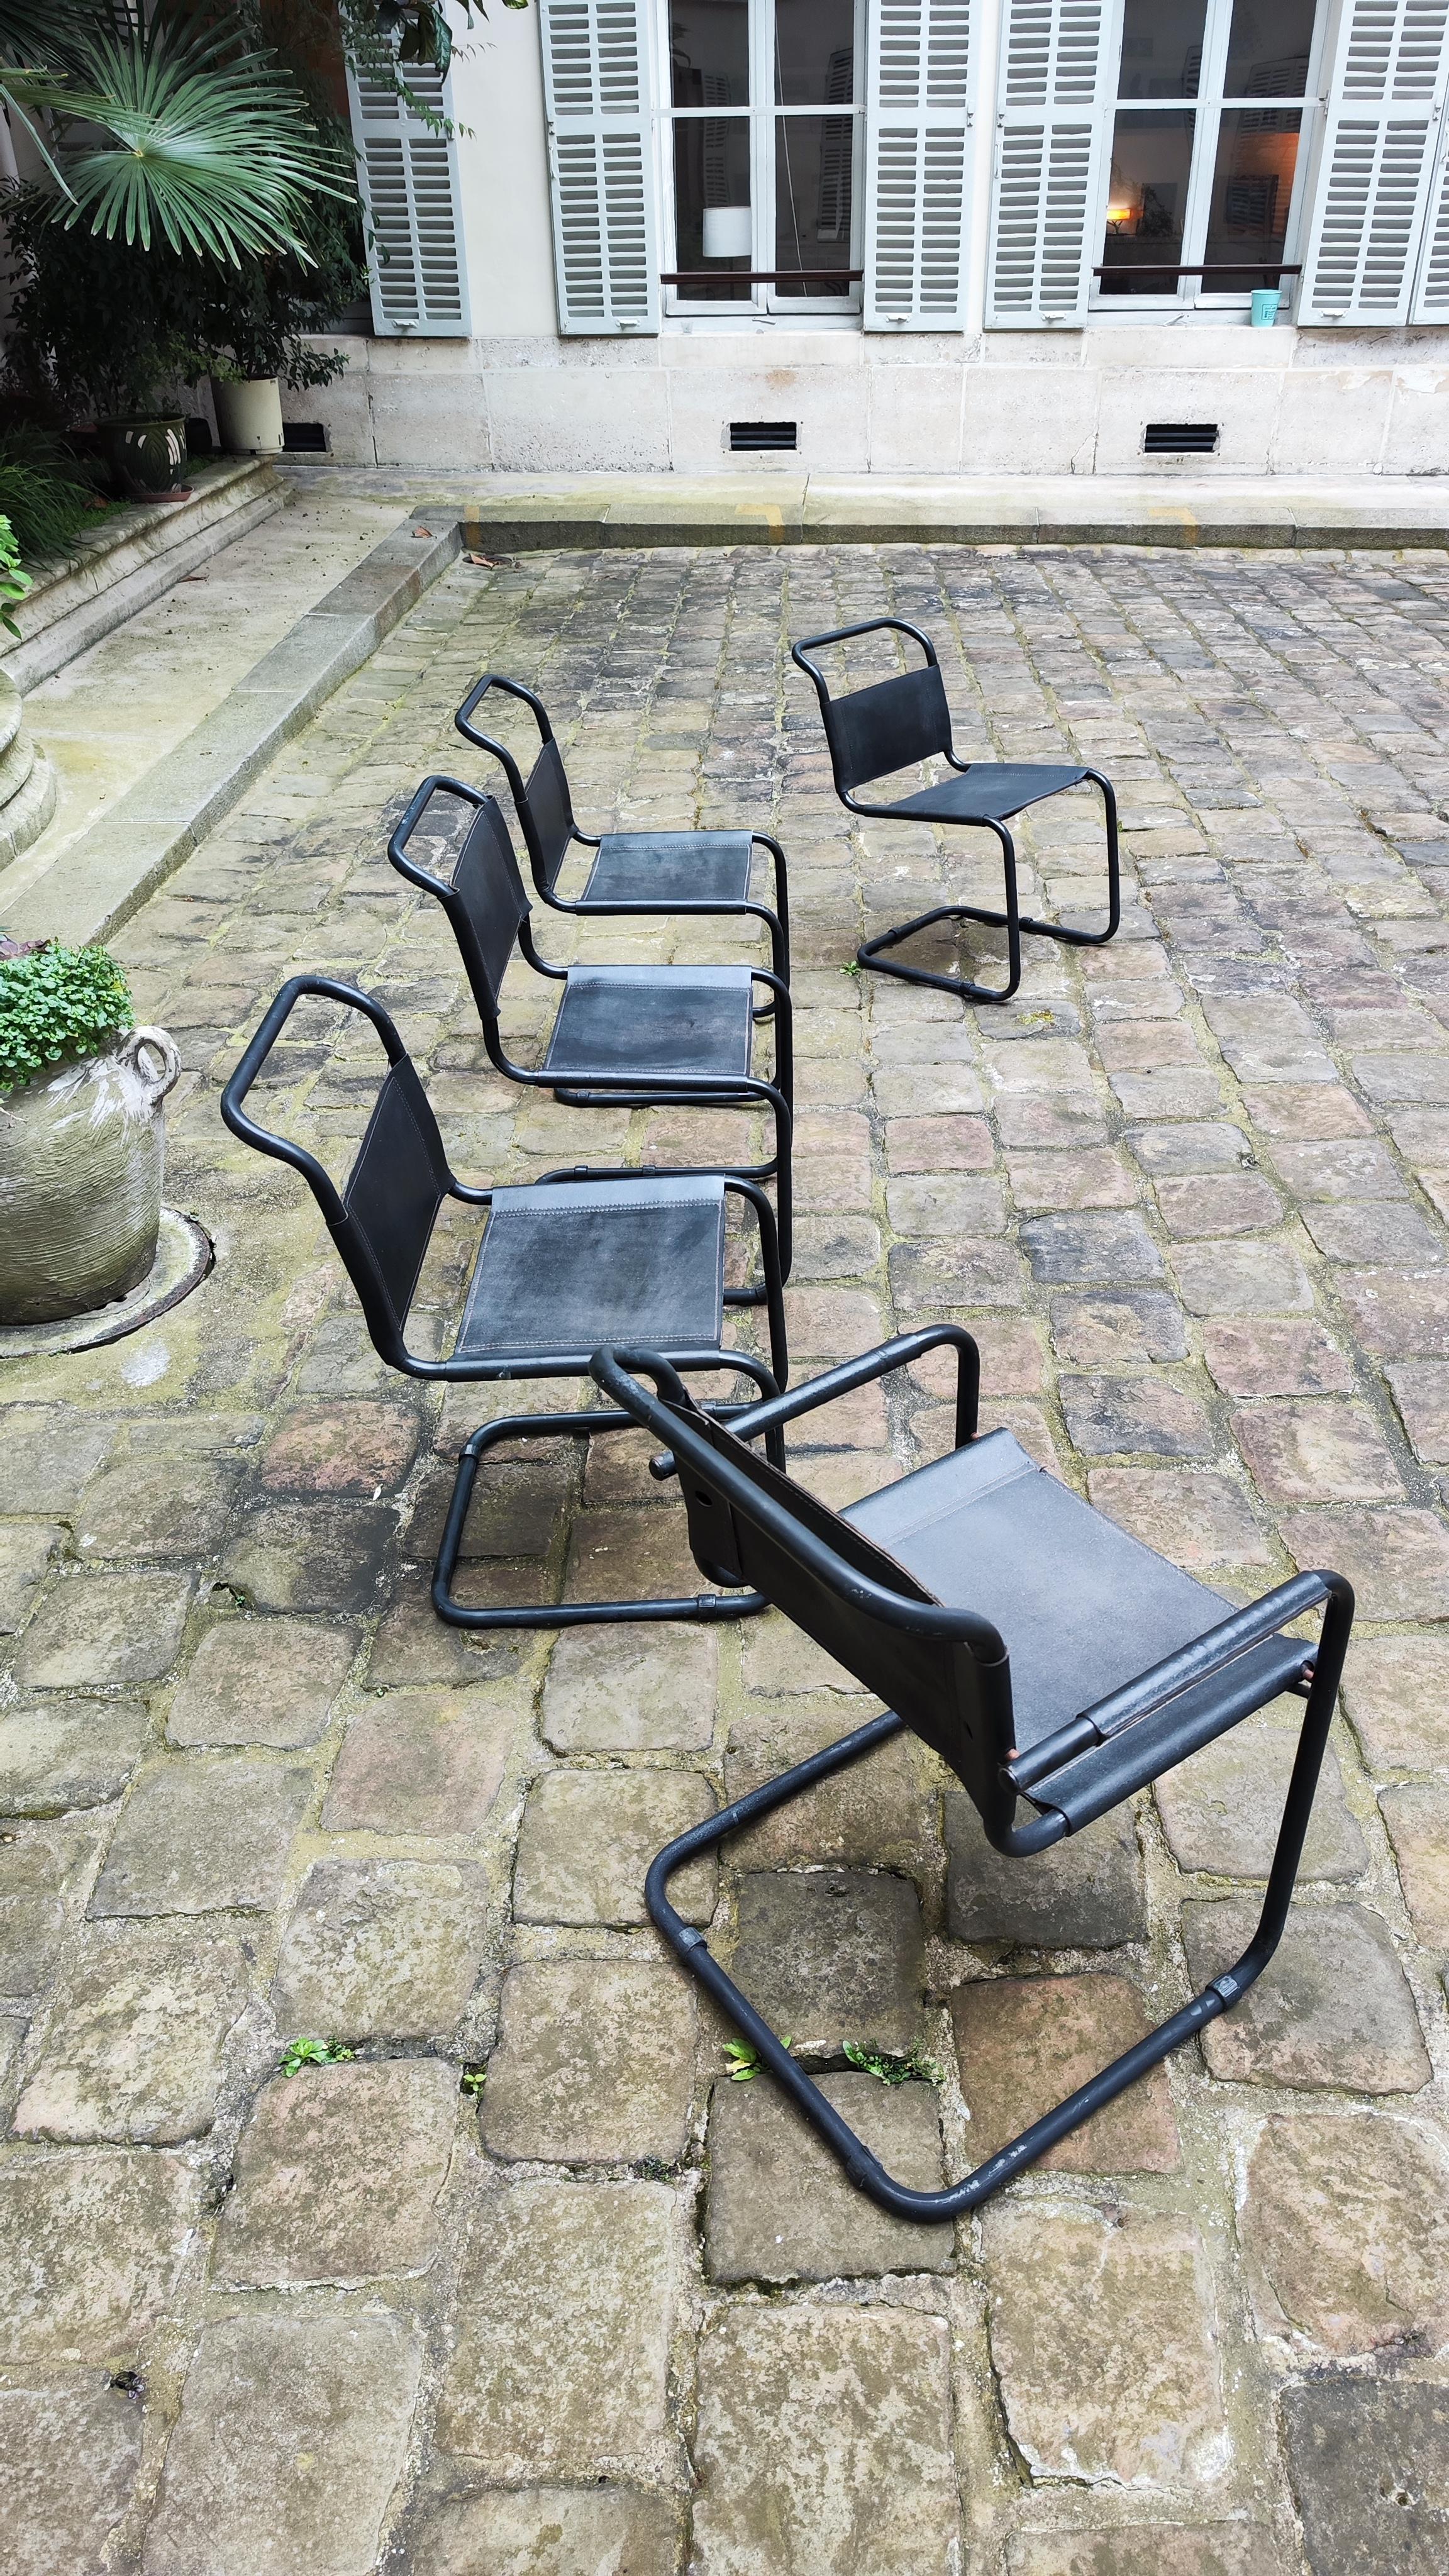 Swiss 4 B33 MART STAM CANTILEVER CHAIRS AND 1 S34 ARMCHAIR - 80s  - 1980 For Sale